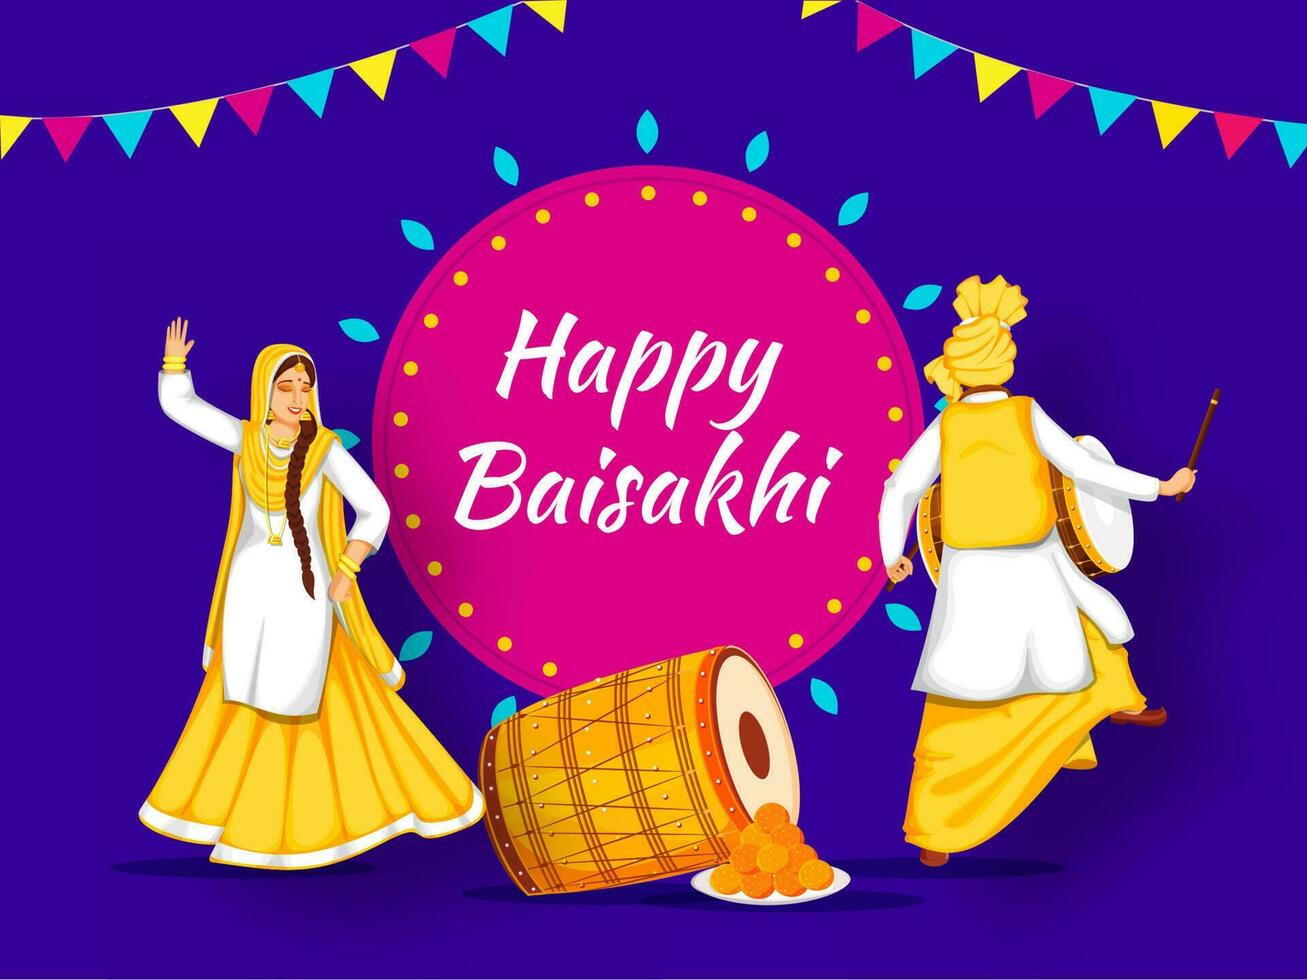 Happy Baisakhi Celebration Background with Punjabi Man Playing Dhol, Young Woman Dancing and Indian Sweets. vector